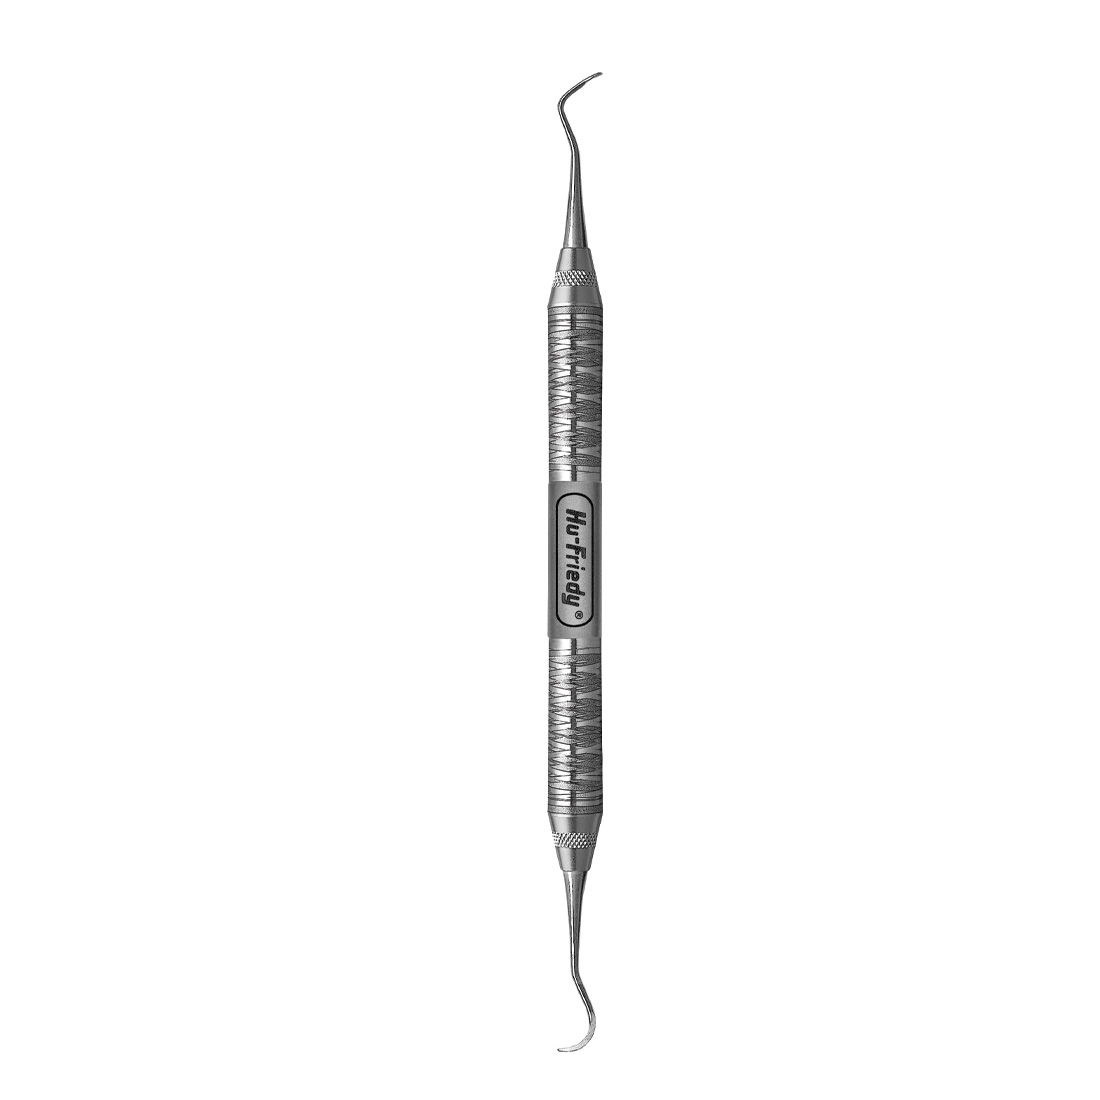 Scaler Nevi #1 Anterior Double Ended #6 Satin Steel Handle